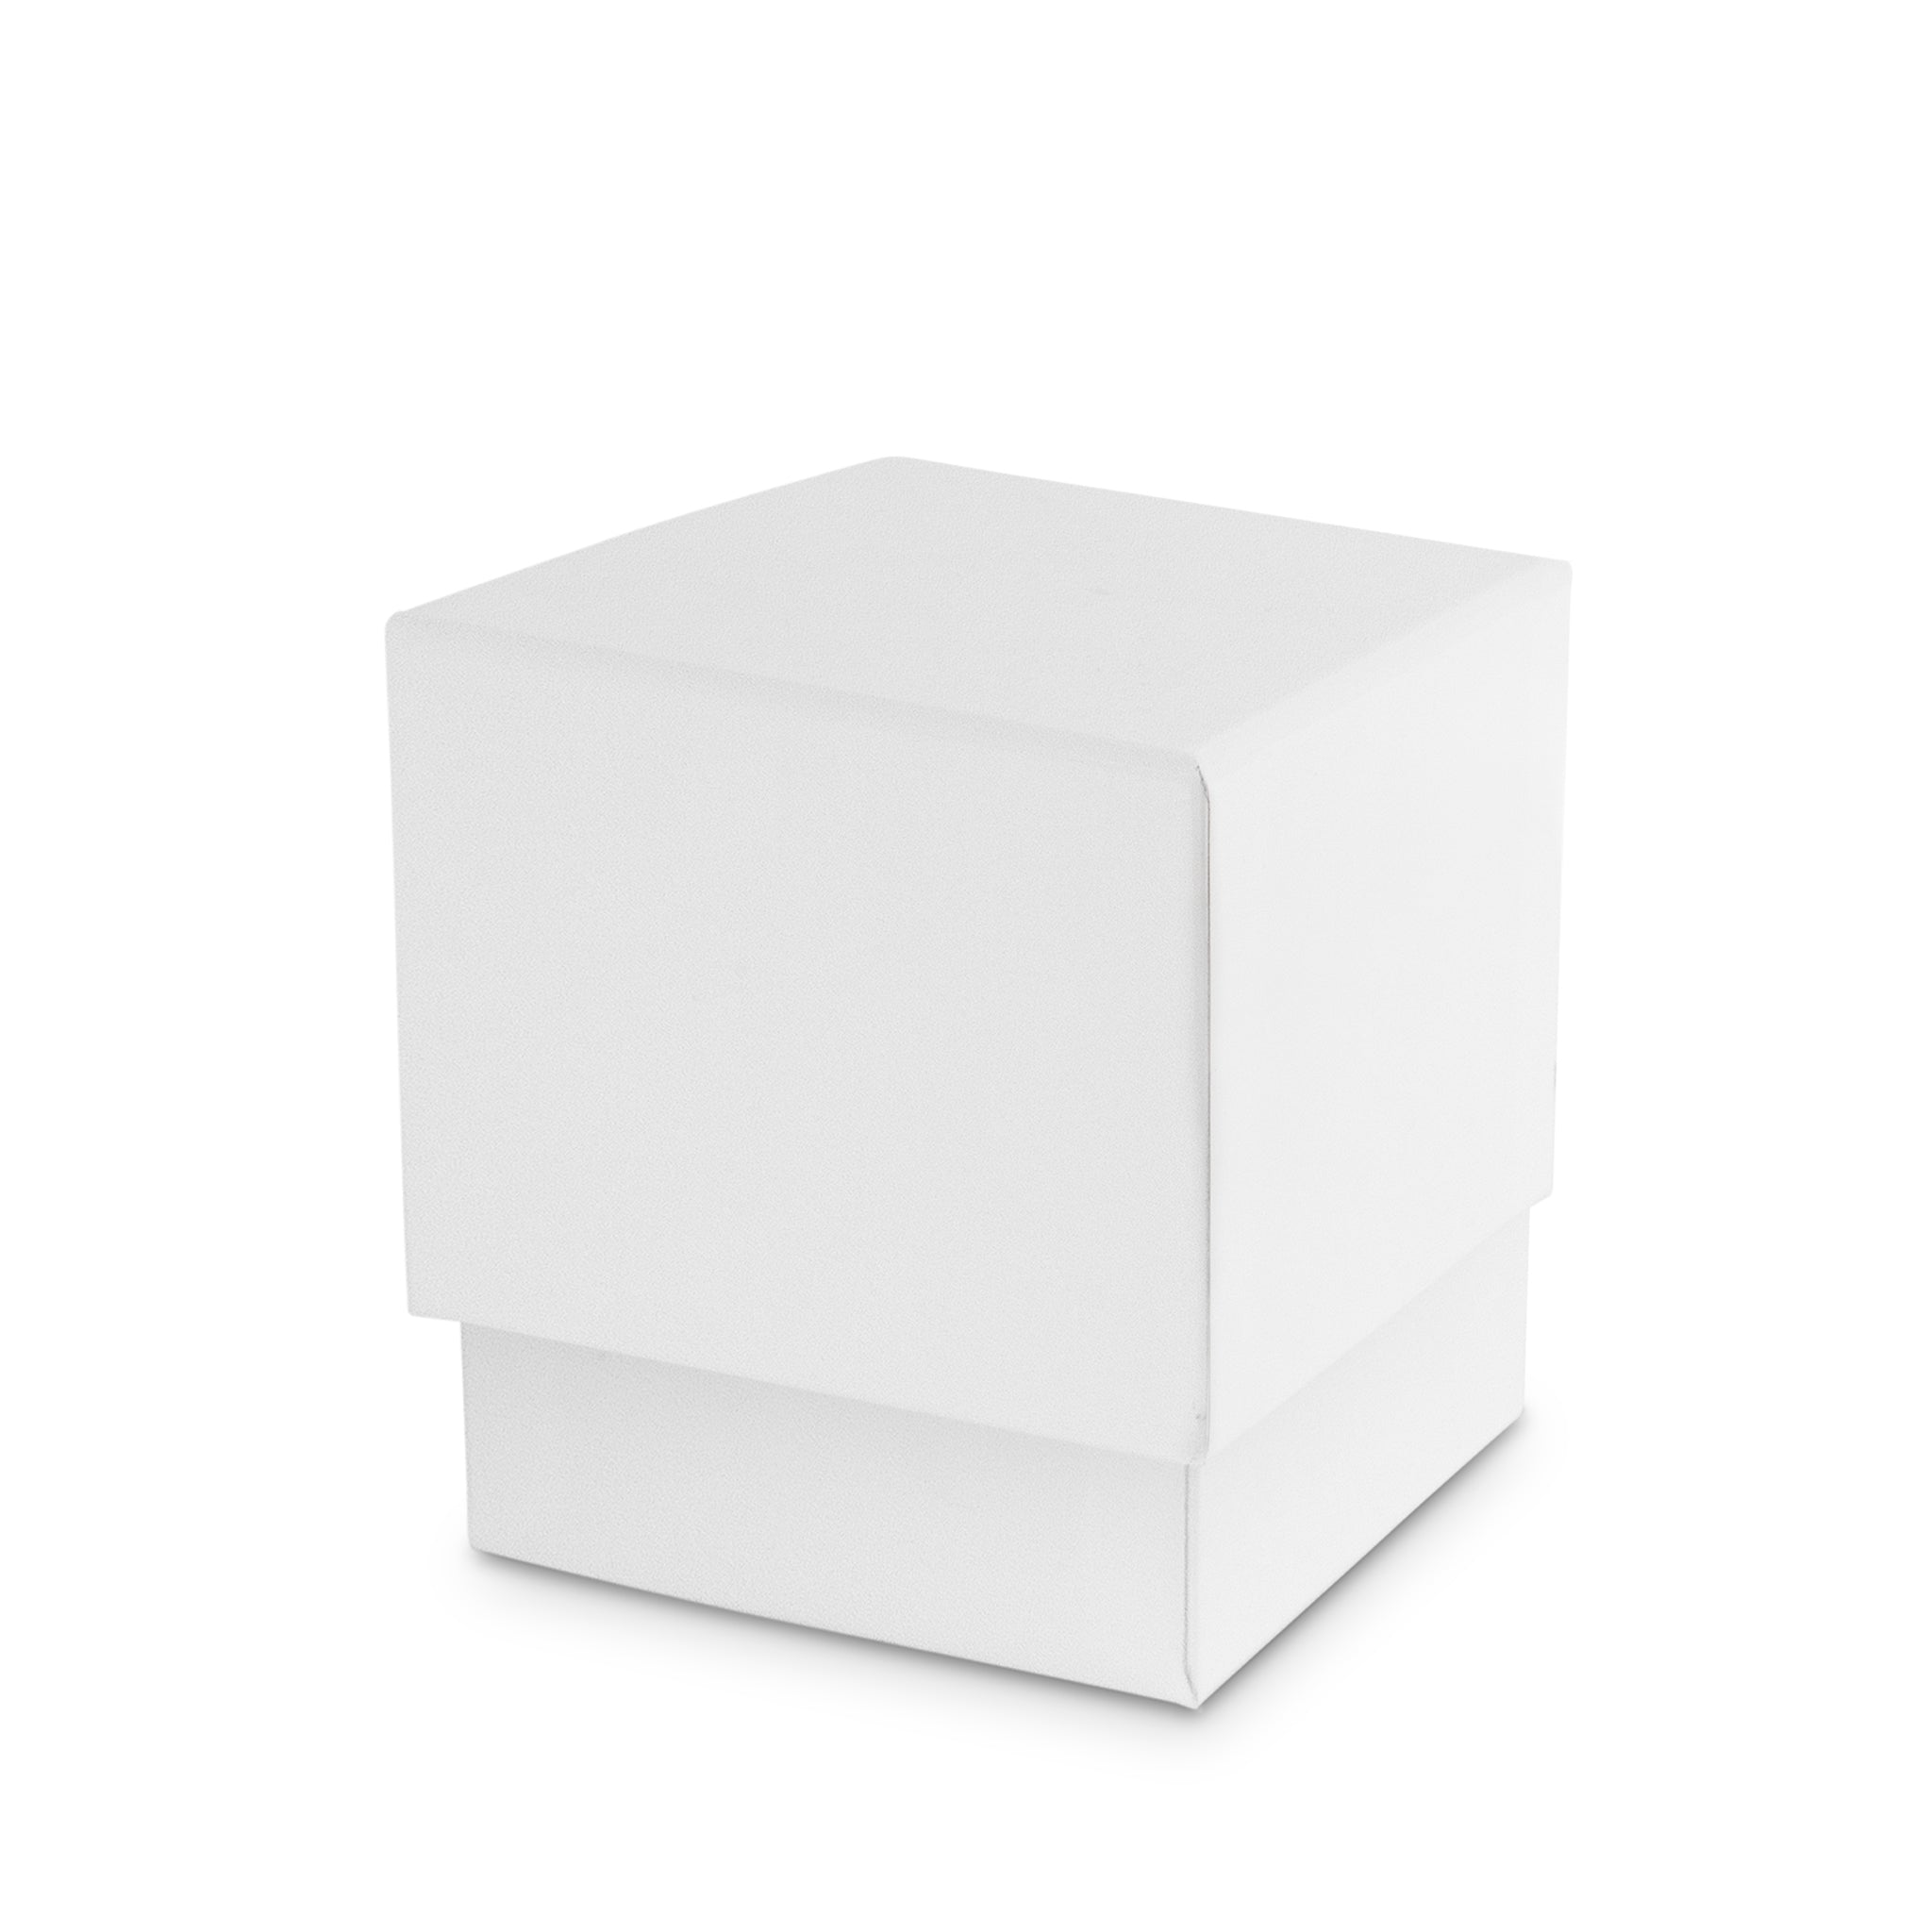 Candle Making Supplies  SMALL CANDLE GIFT BOX WITH INSERT - FITS 9.5 OZ  MONTICIANO - Candle Making Supplies